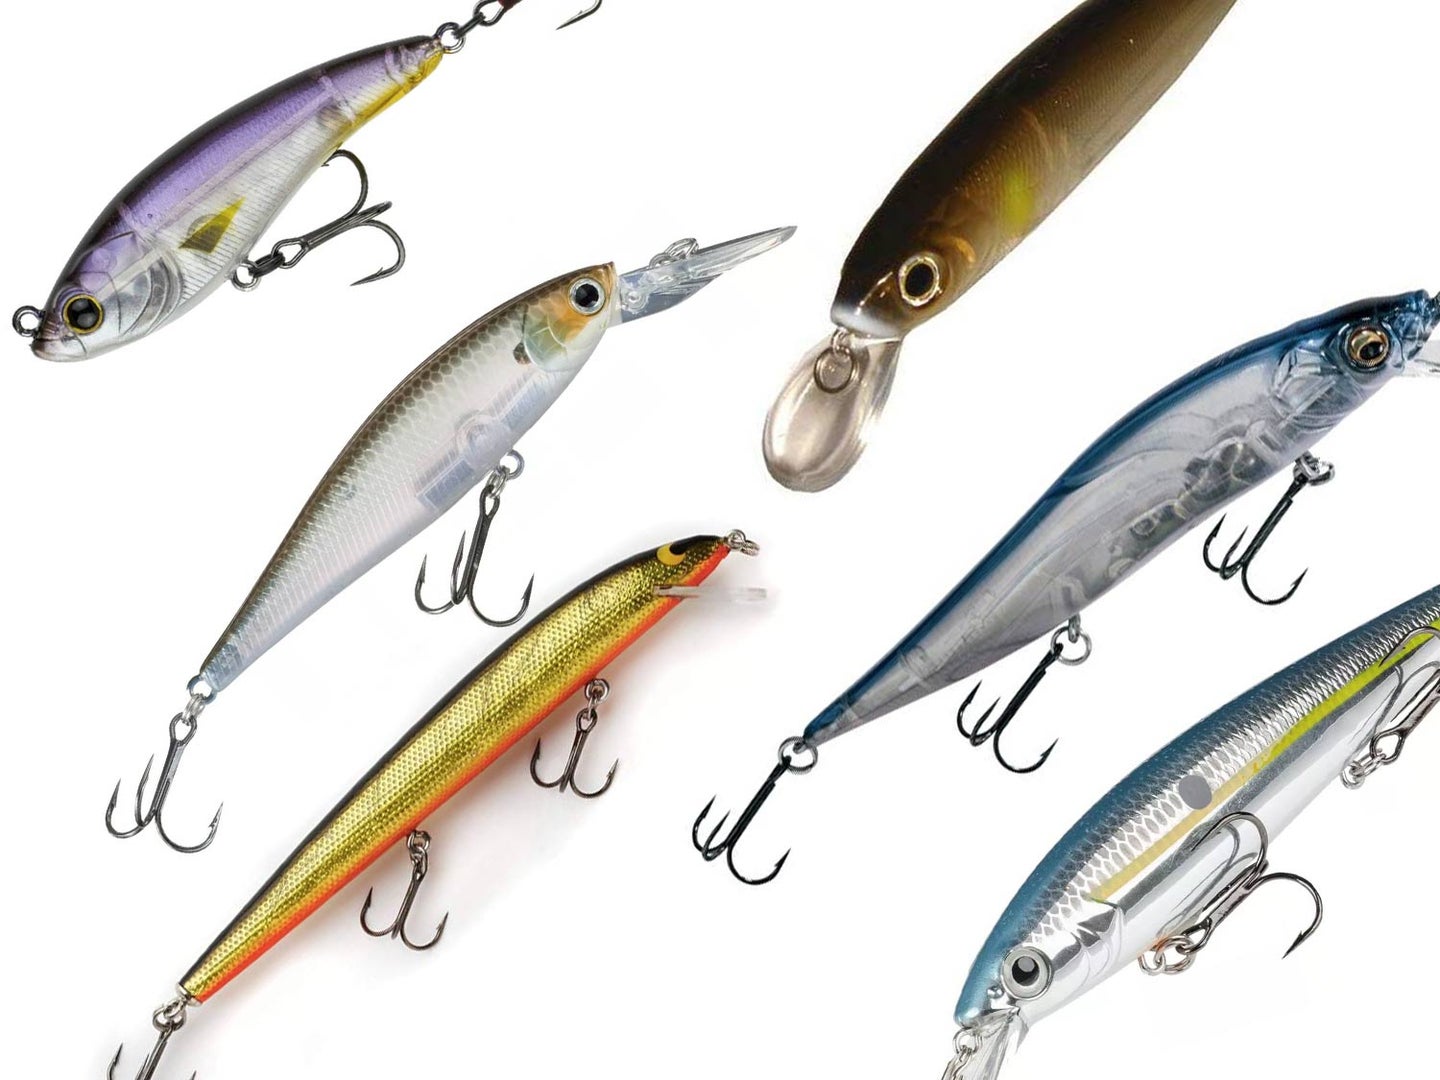 A collection of jerkbait fishing lures.